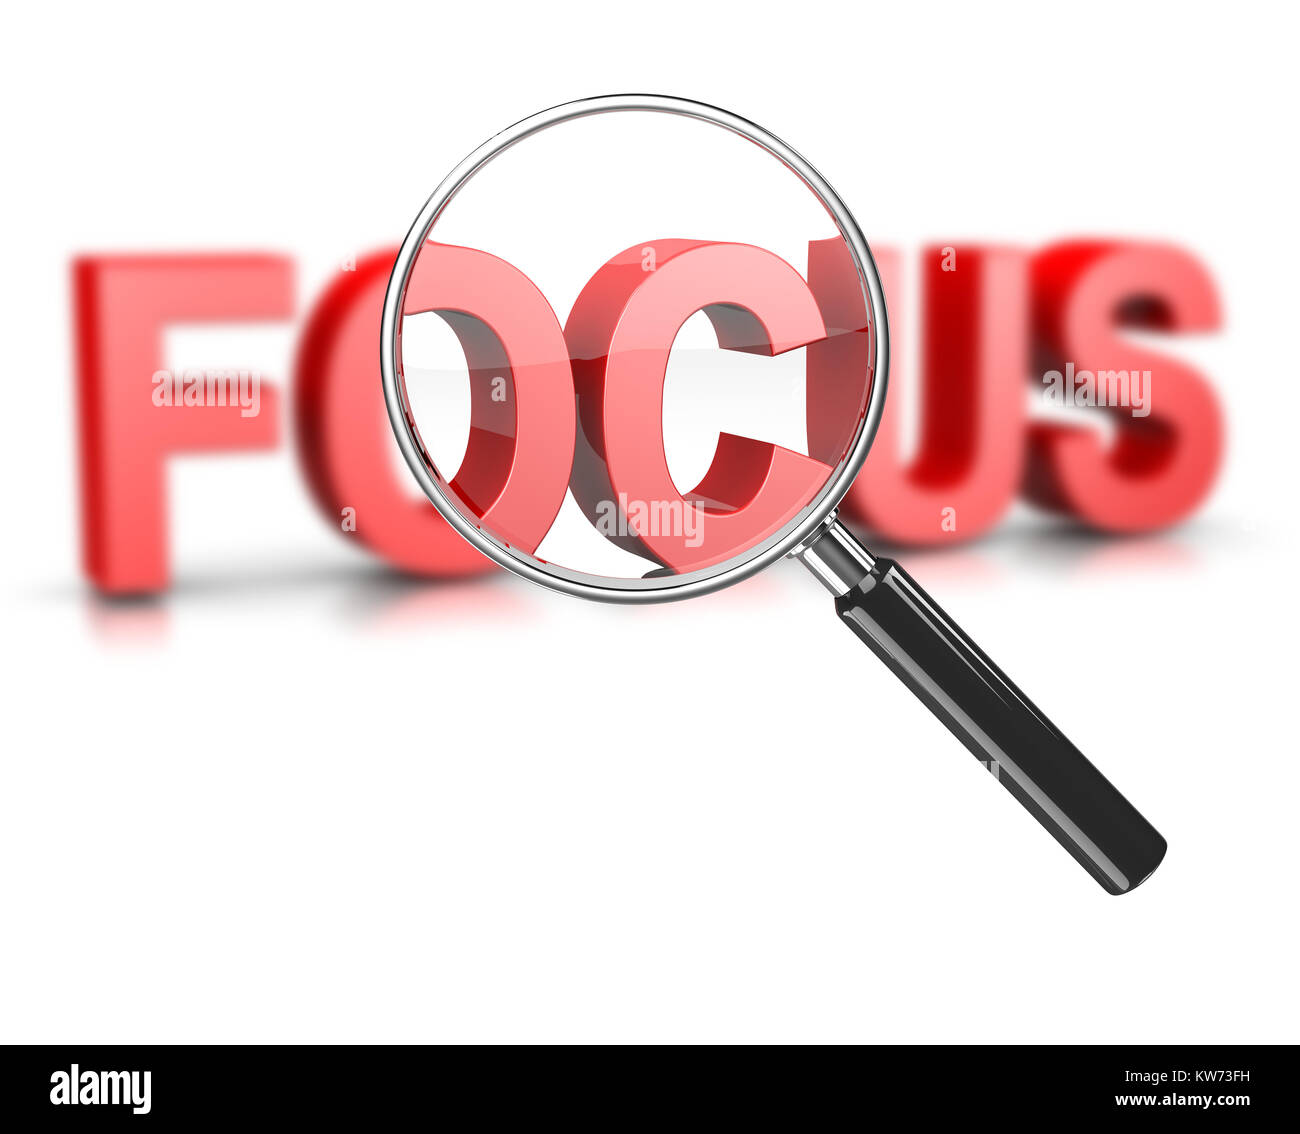 Magnifier Glass Focused on a Blurry Focus Red Text 3D Illustration on White Stock Photo